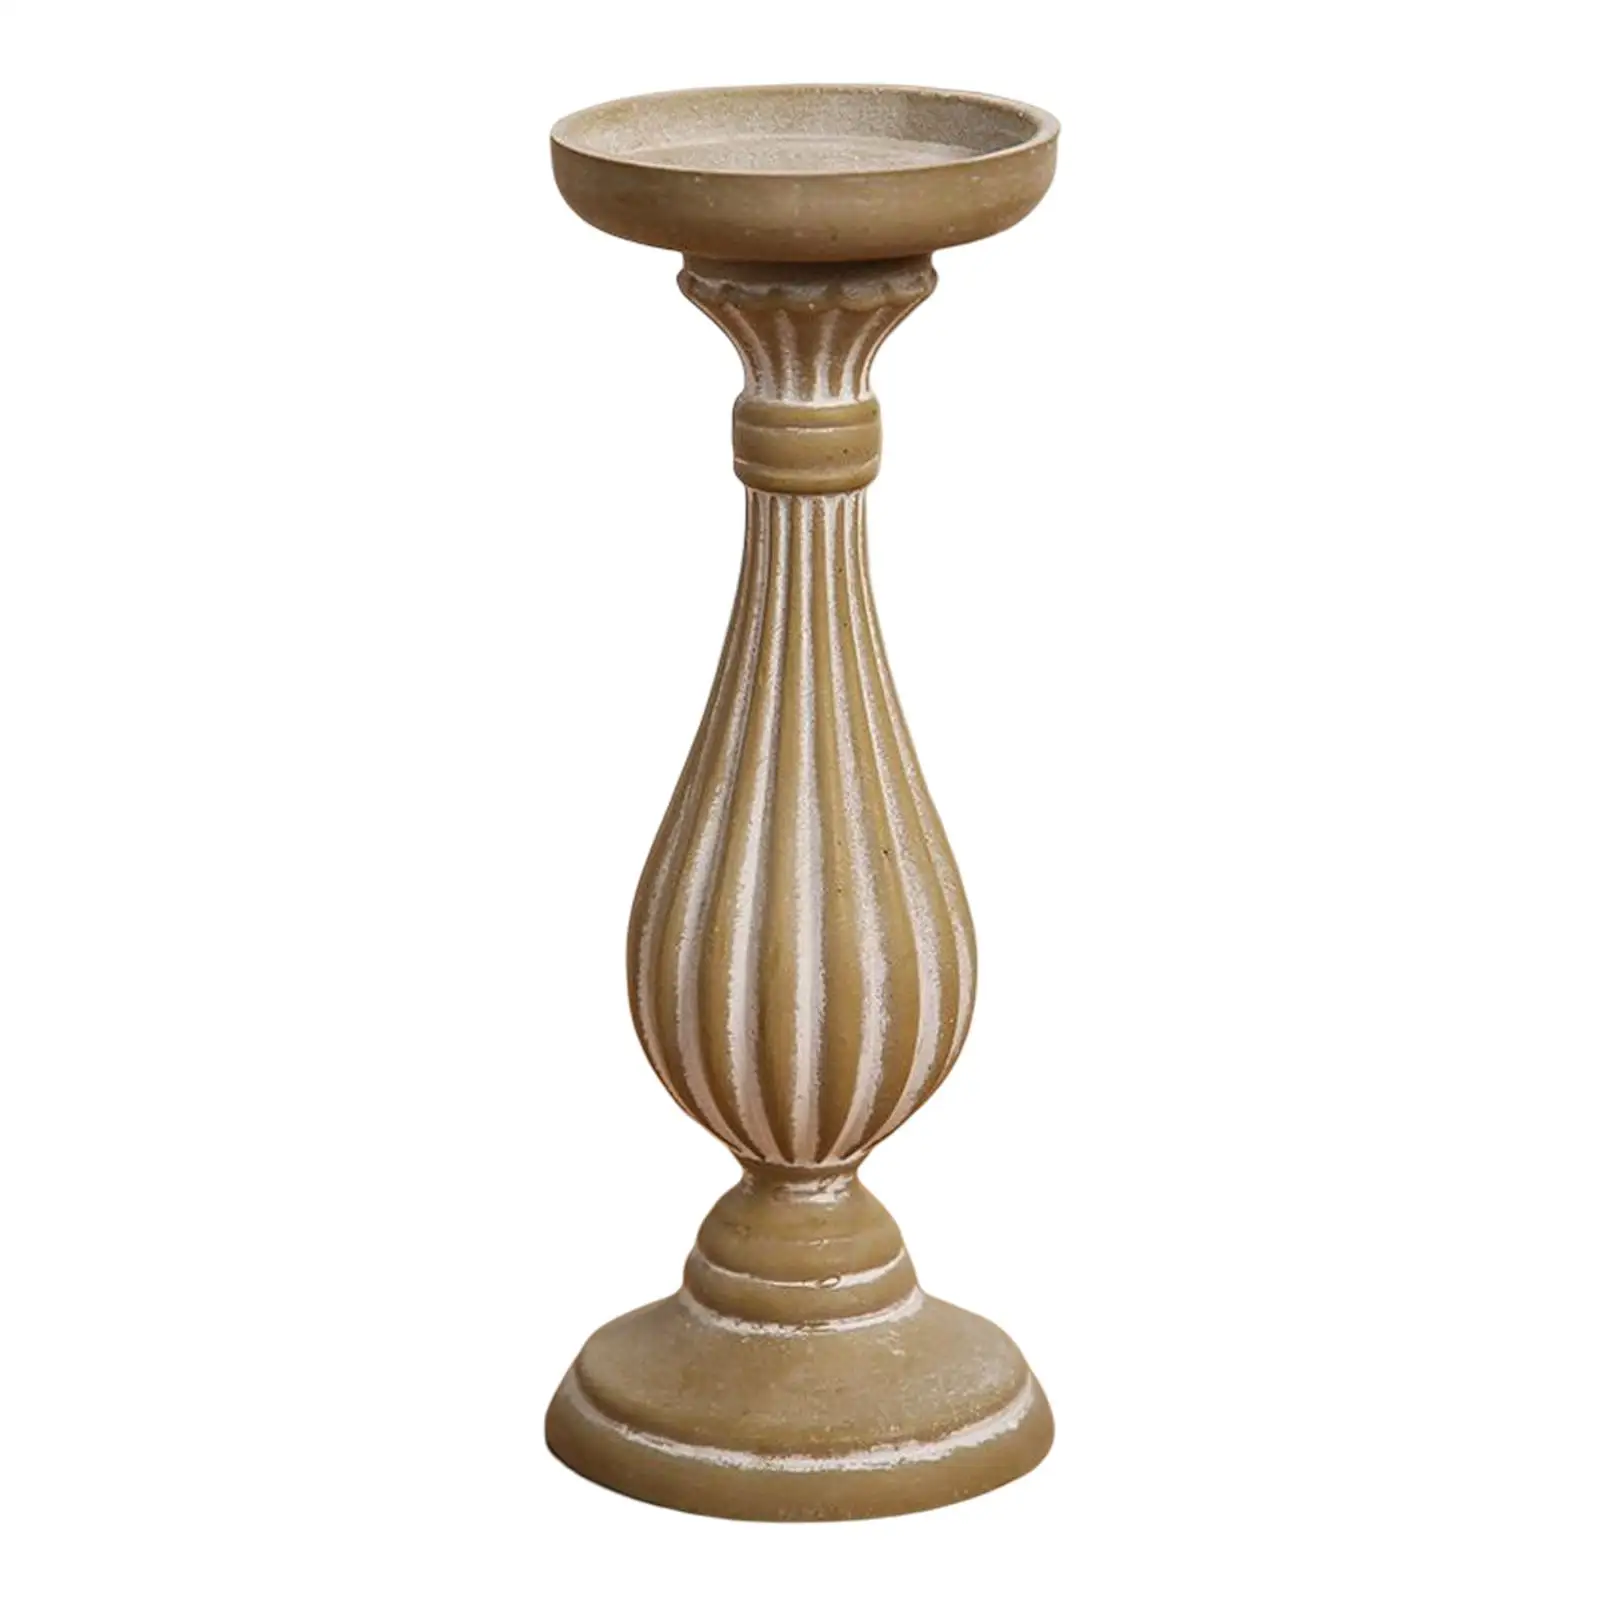 Candle Holder Table Centerpiece Photographic Prop Roman Pillar Candlestick Stand for Scenery Farmhouse Party Wedding Living Room